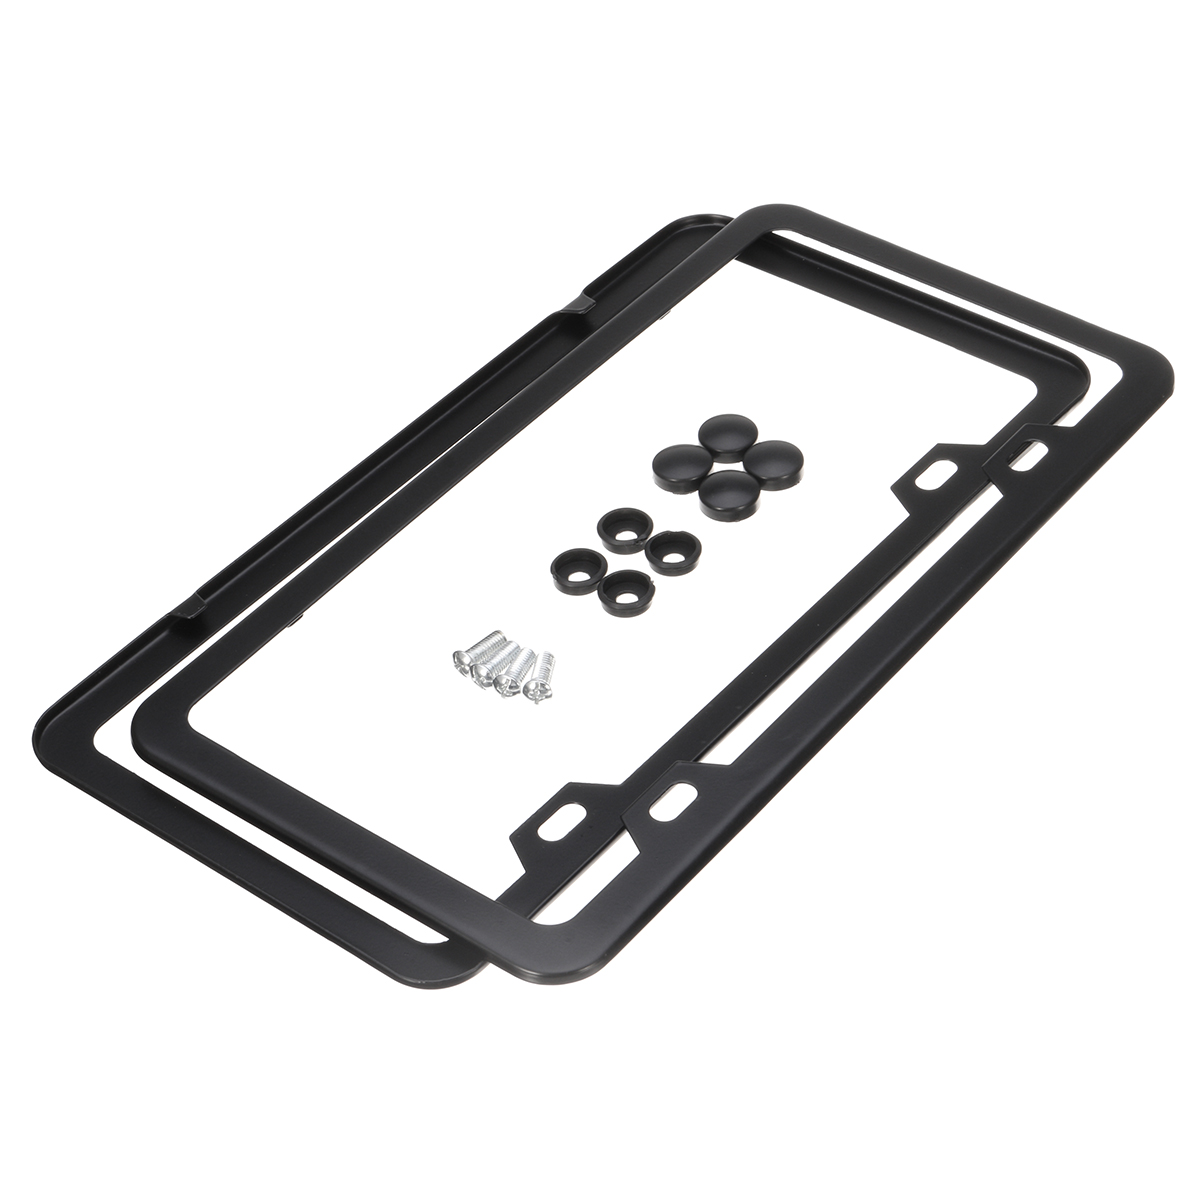 2 X Car License Plate Frame Stainless Steel Silver Tag Cover Screw Cap Black WYS